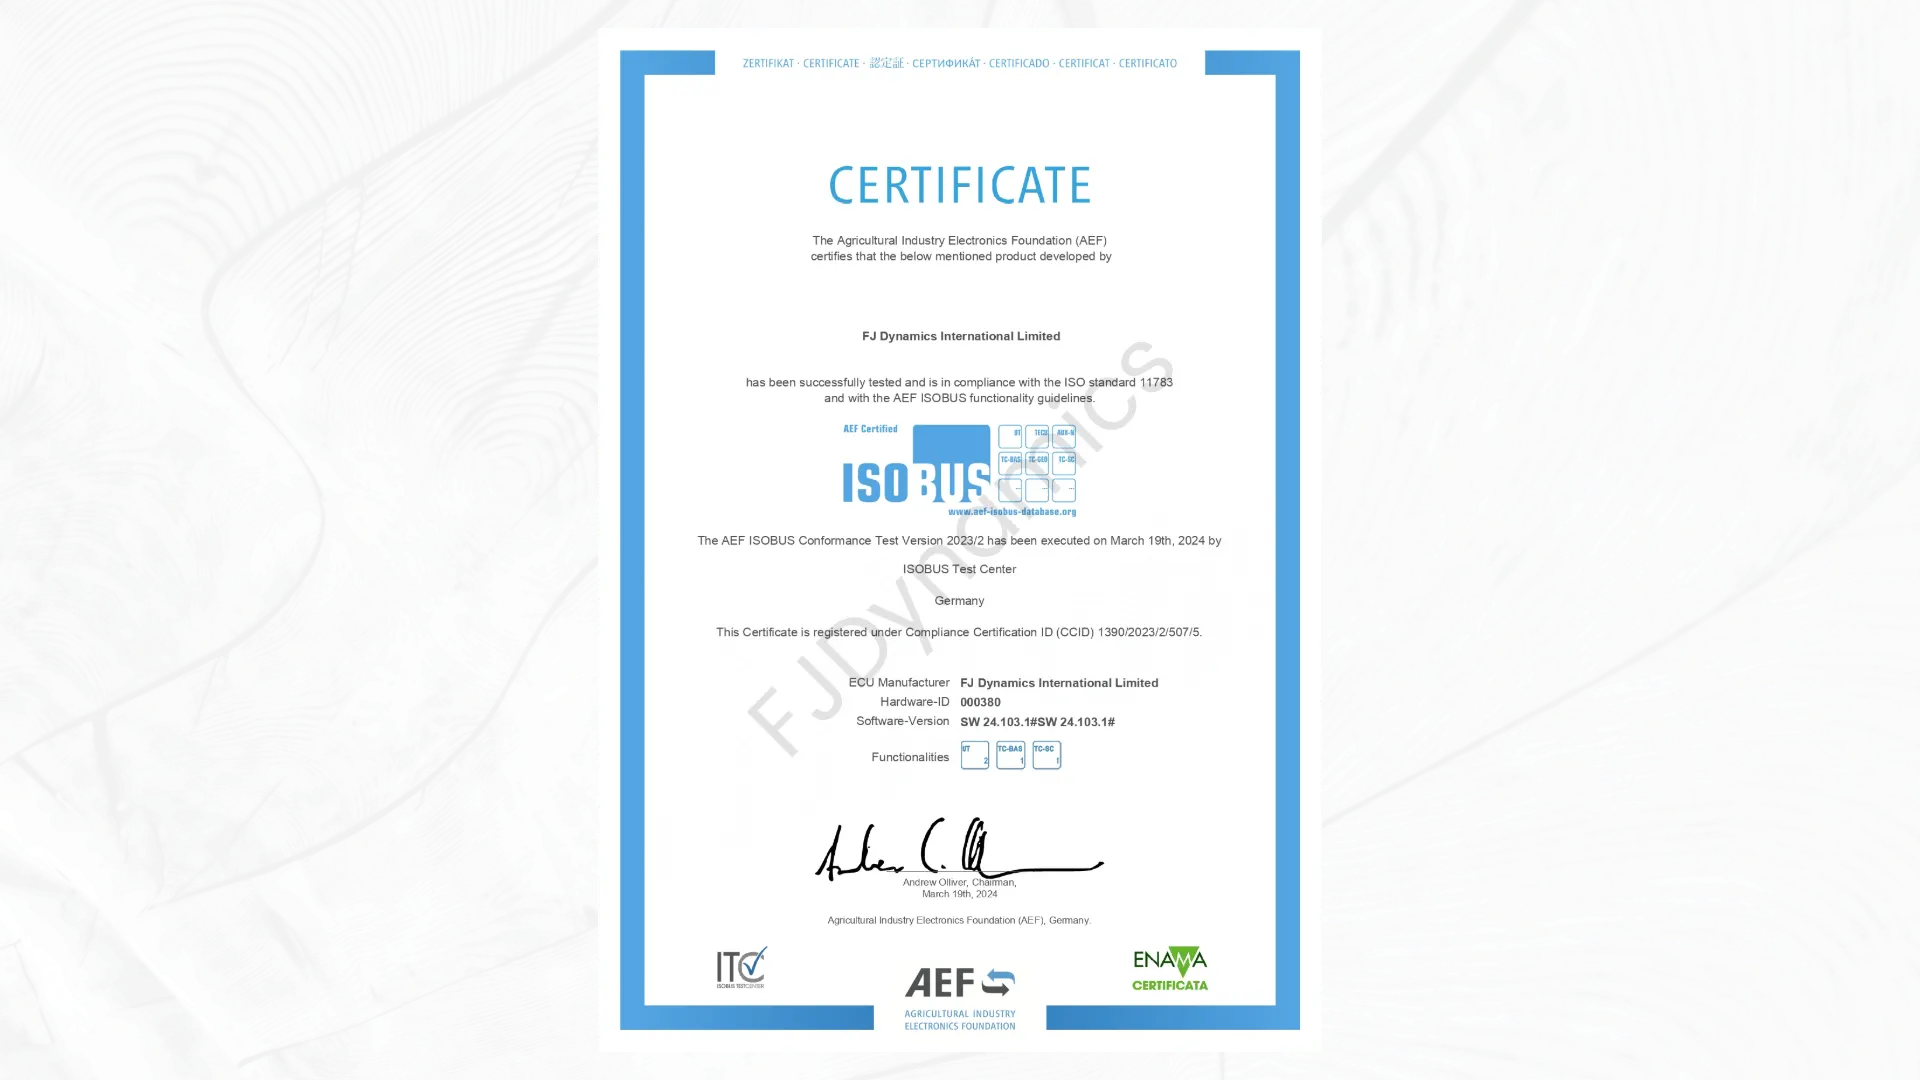 The FJD AT1 Autosteering Kit and FJD AT2 Auto Steer System have achieved certification under the UT2.0/TC-BAS1.0/TC-SC1.0 ISOBUS standards, ensuring compatibility with a wide range of ISOBUS-supported machinery and implements that share the same certification.